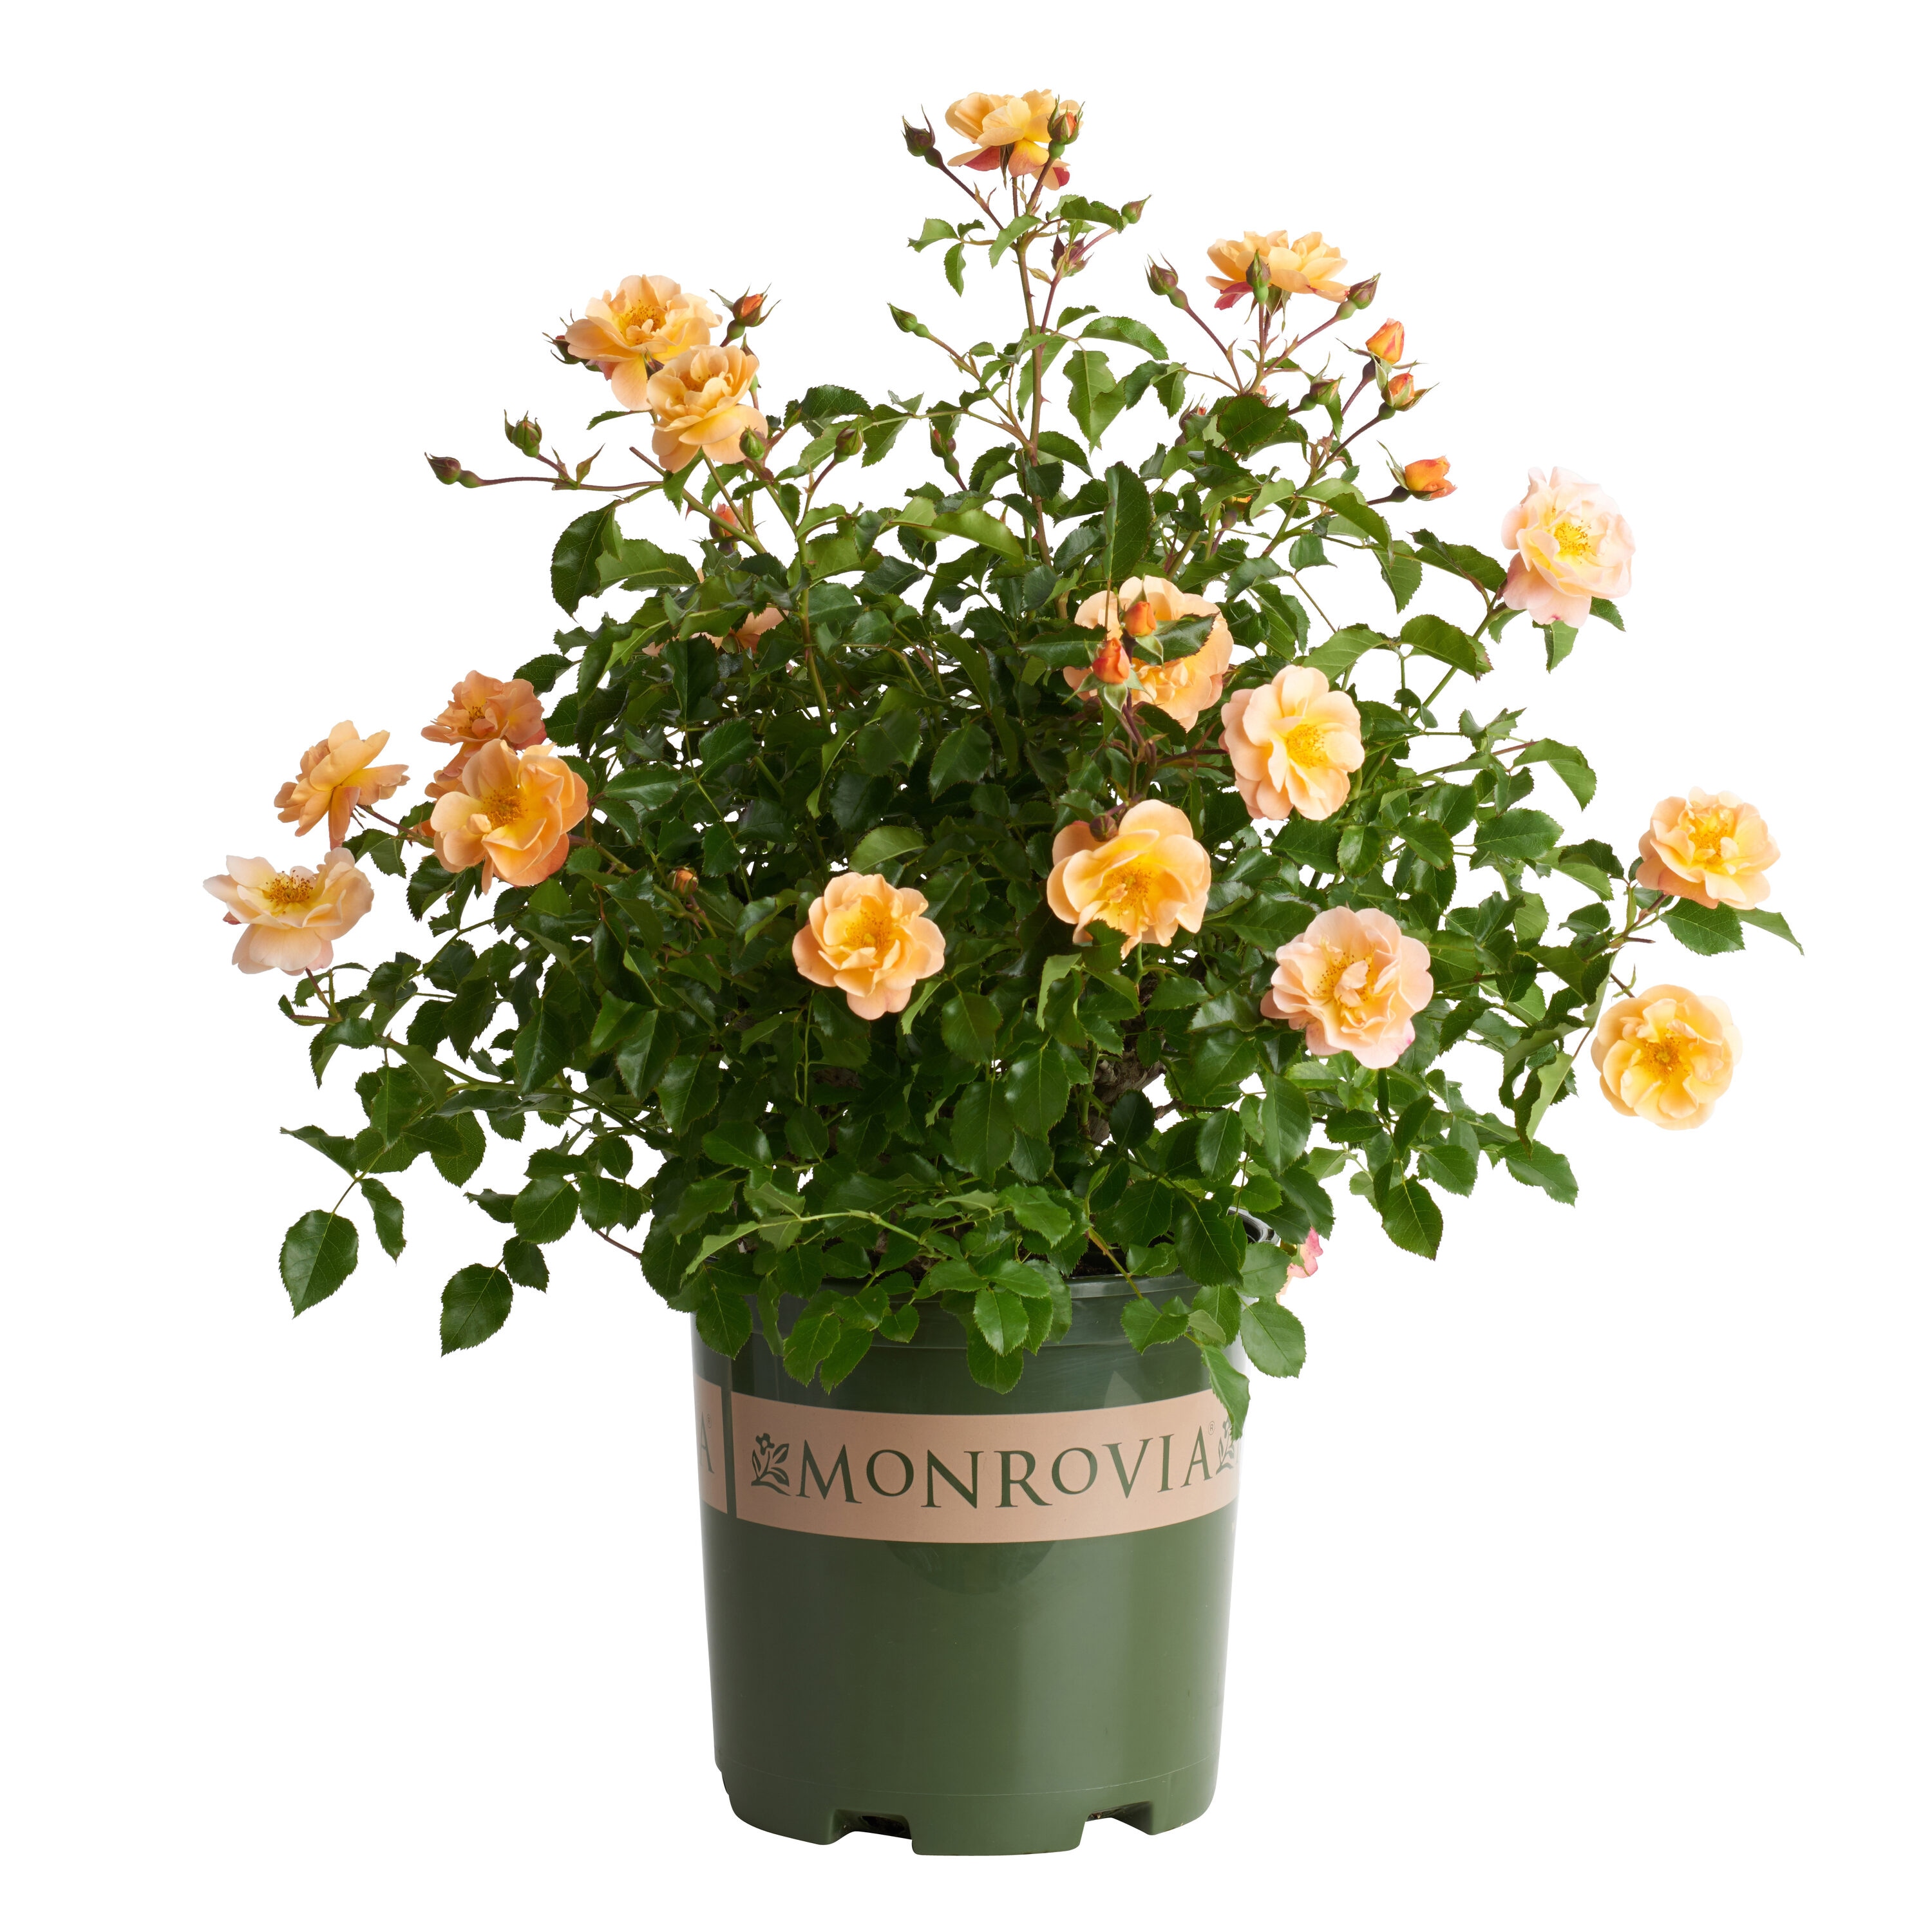 Deal of the Day - Additional 25% More Blooms For Delivery at Fresno, CA